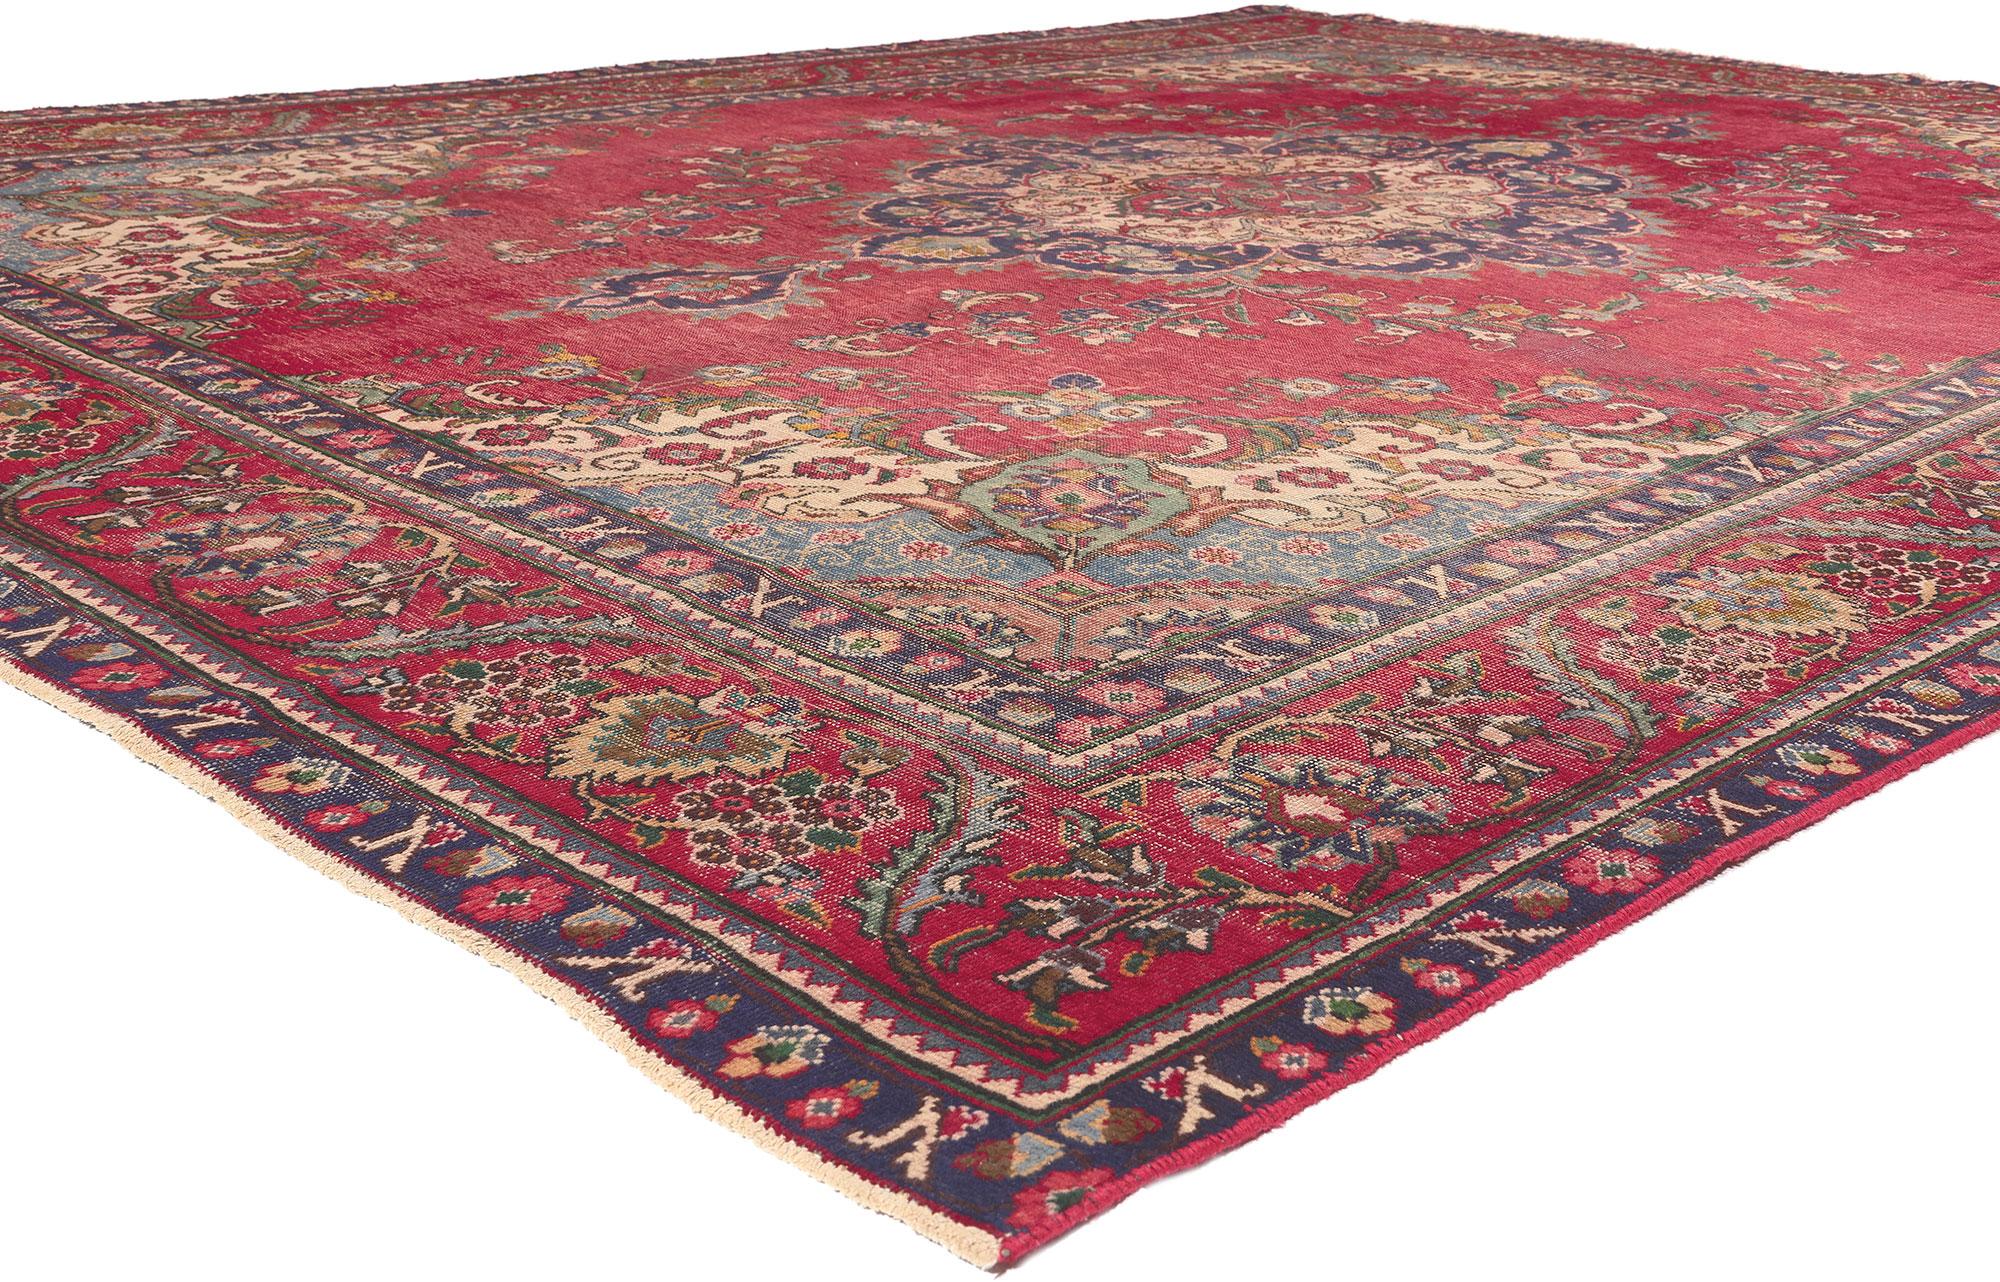 78088 Antique-Worn Persian Tabriz Rug, 09'11 x 12'11. 
Rustic sensibility meets nostalgic charm in this hand knotted wool antique-worn Persian Tabriz rug. The intricate floral design and sophisticated color palette woven into this piece work